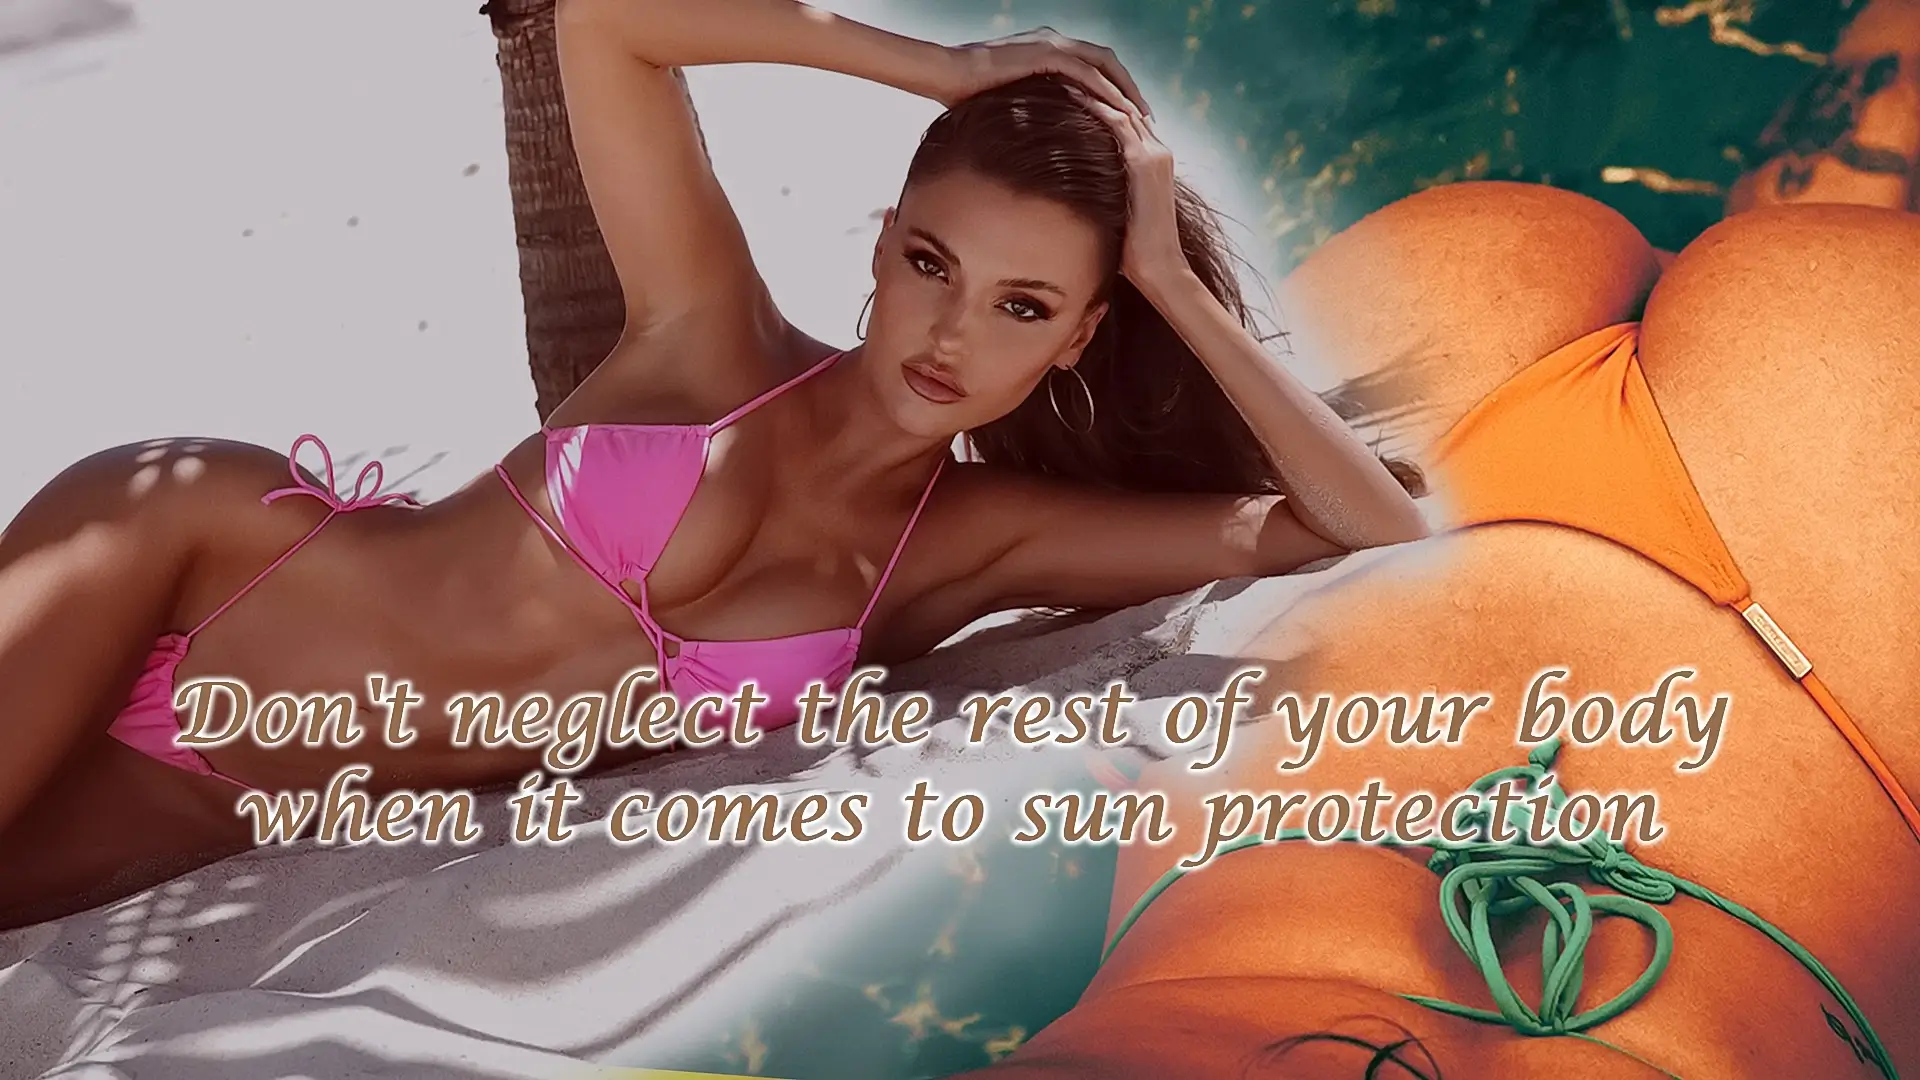 Don't neglect the rest of your body when it comes to sun protection